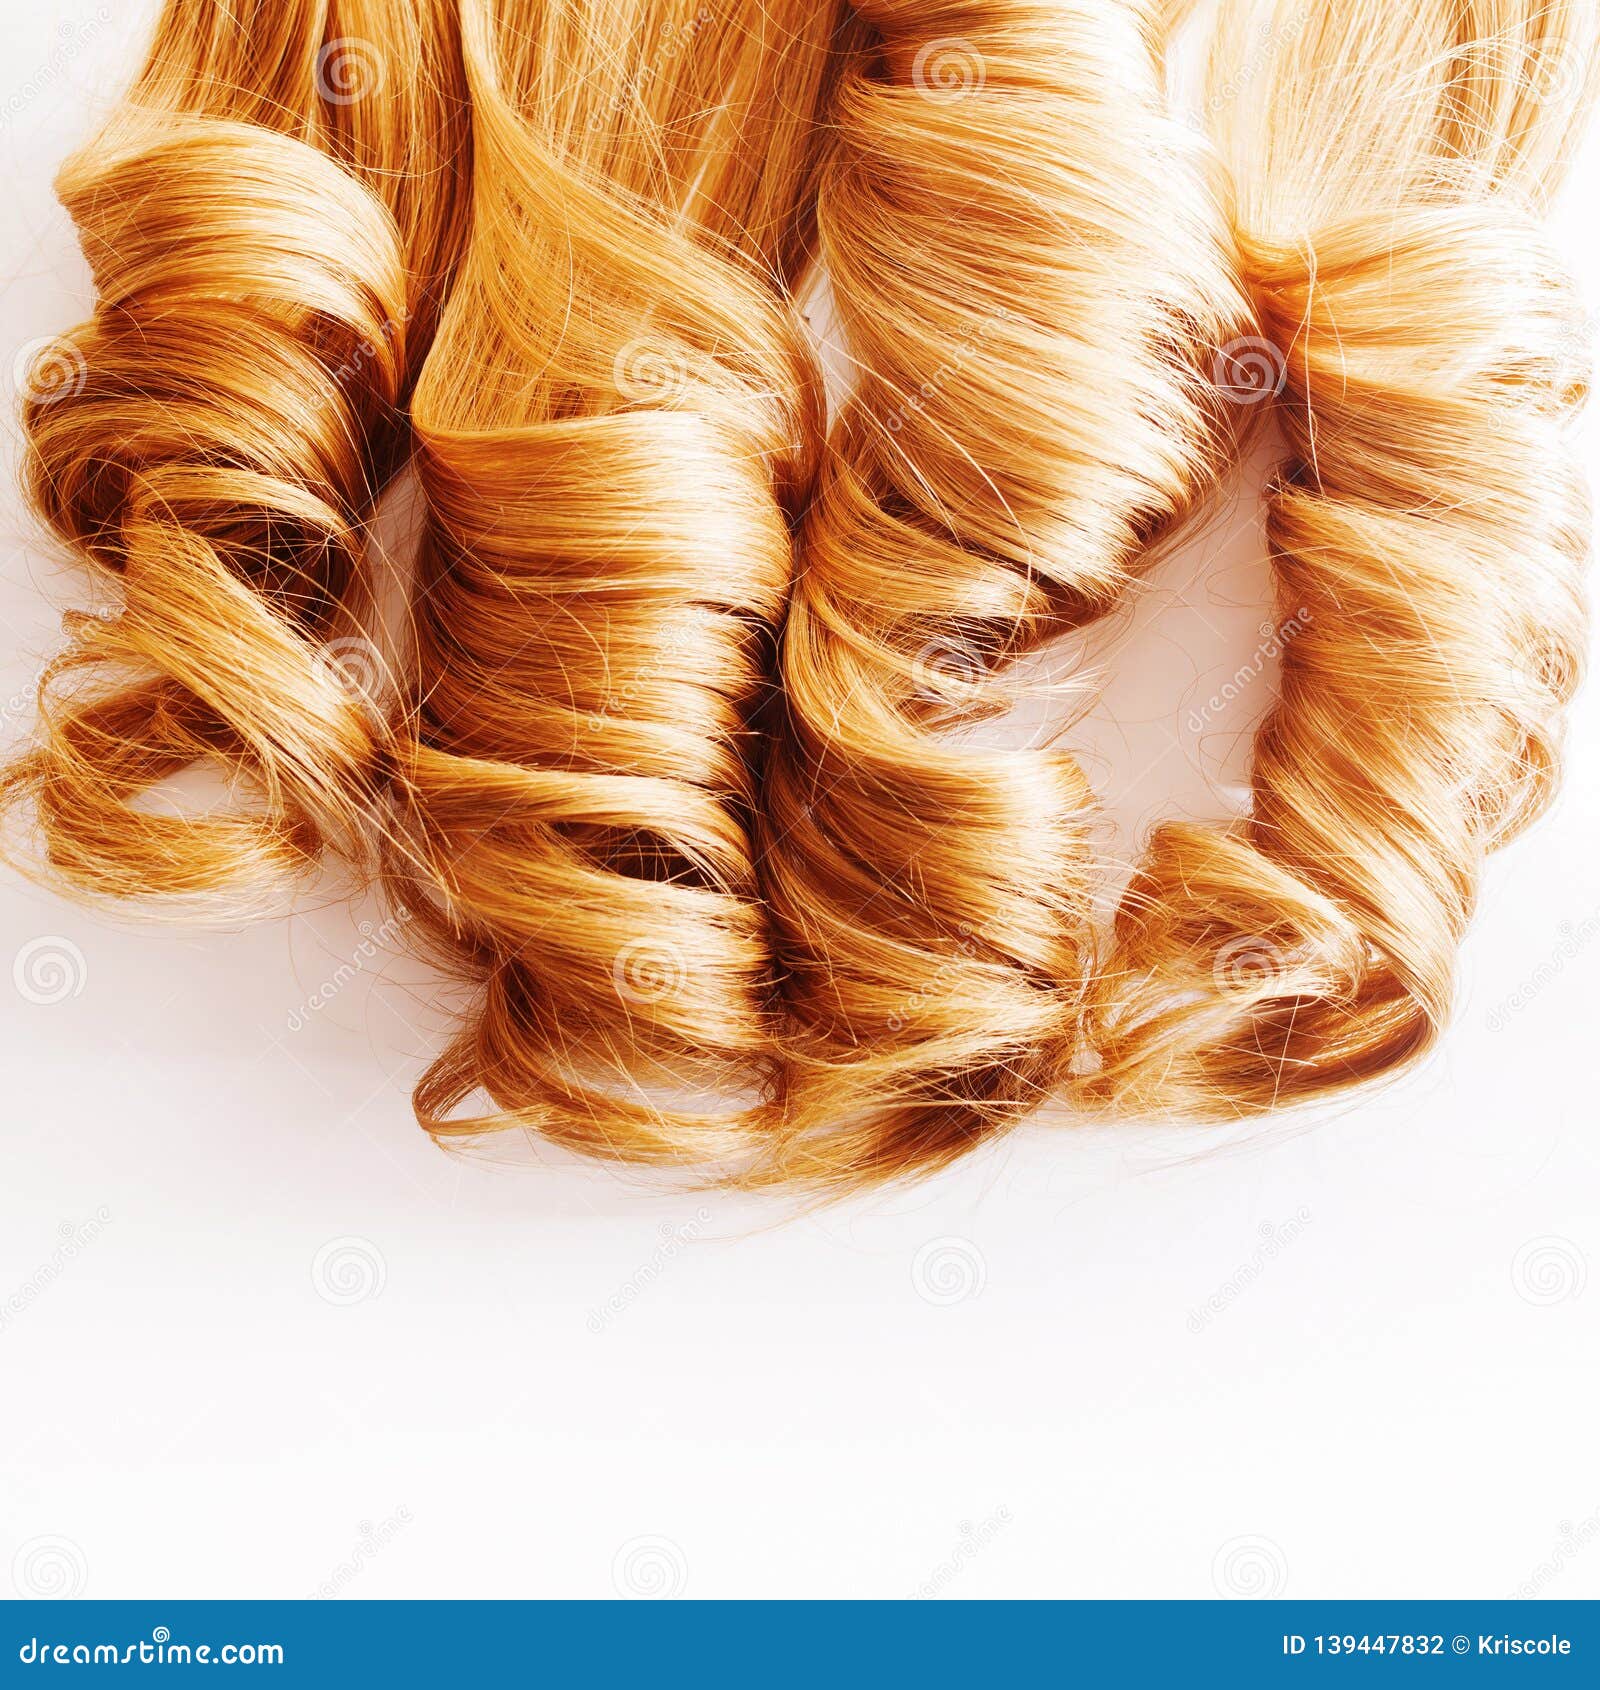 curls curled on the curling iron,  on white background. strand of light or red hair, hair care